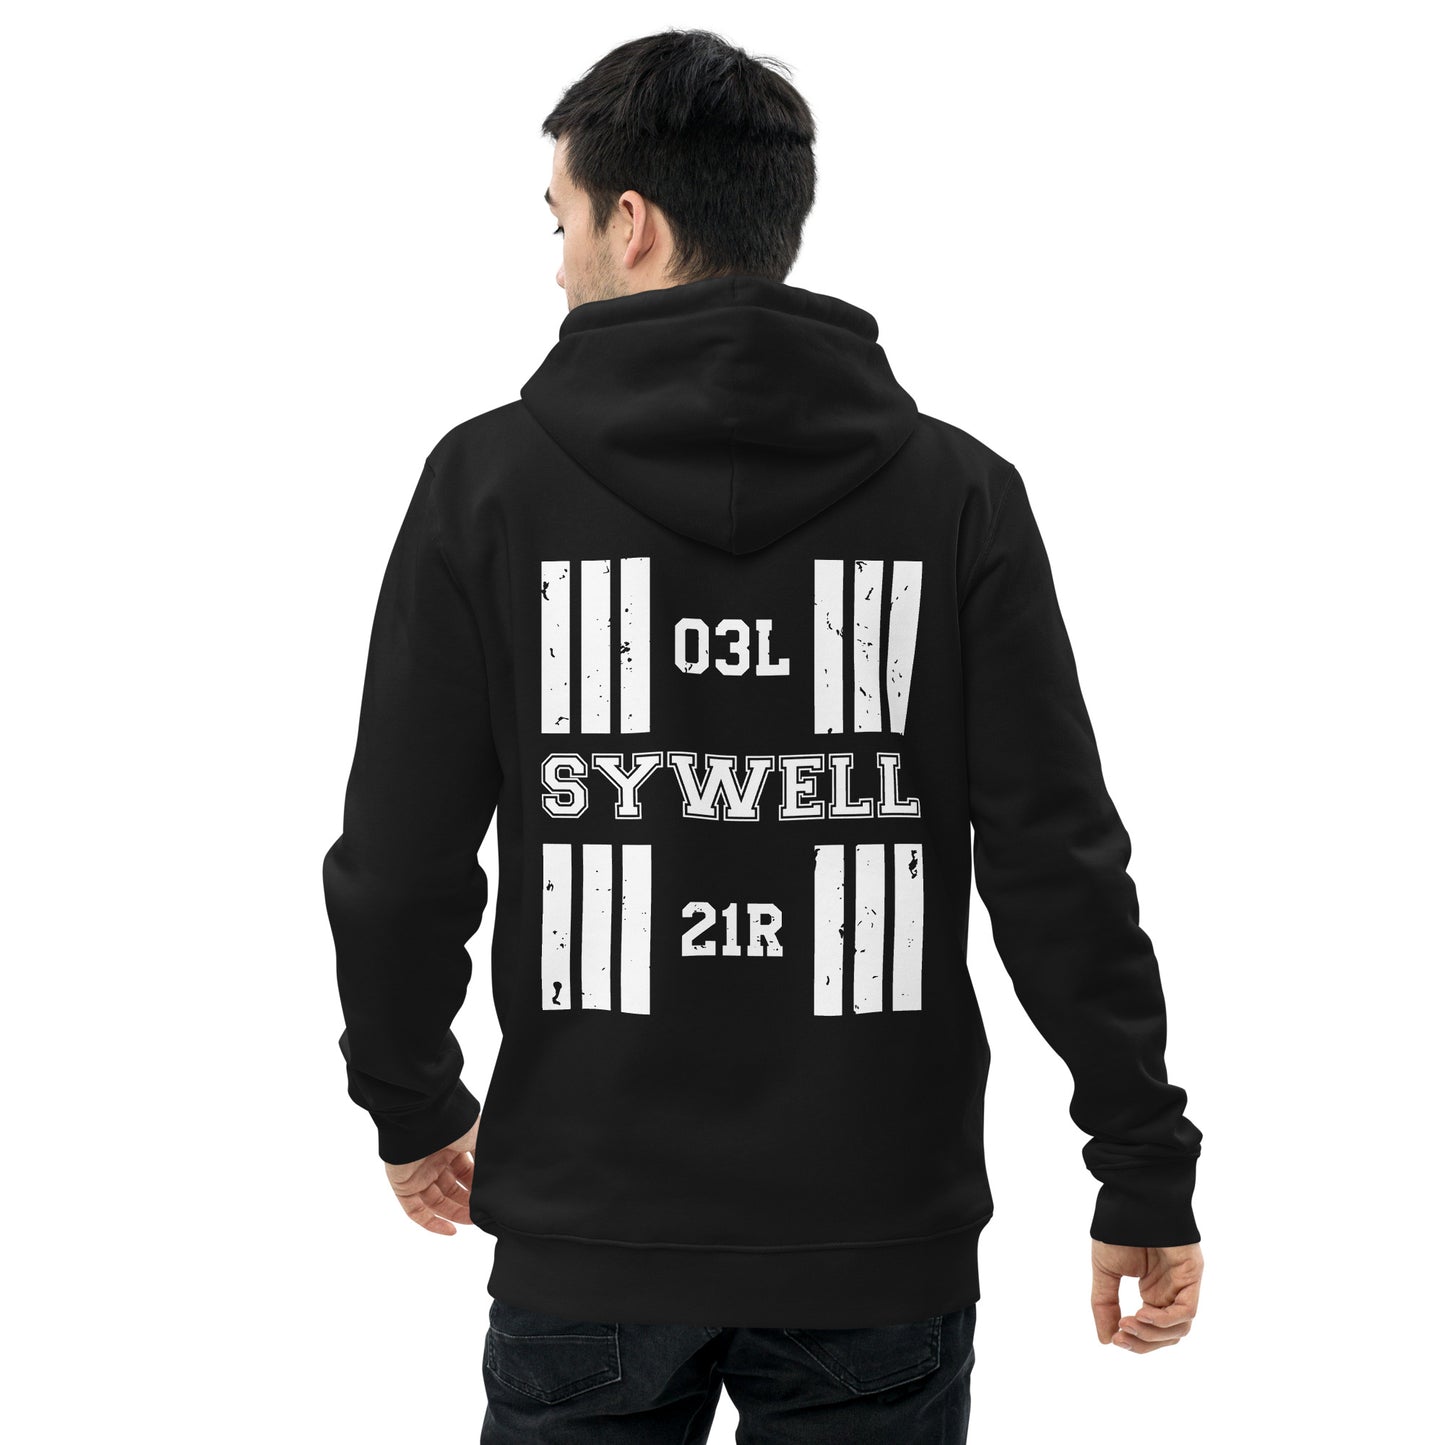 Coloured in black the Sywell Aerodrome Designator heavyweight hoodie features a discreet collegiate print on the front with a bold print featuring the airport's name and designator, framed by stylised distressed threshold markings on the back.